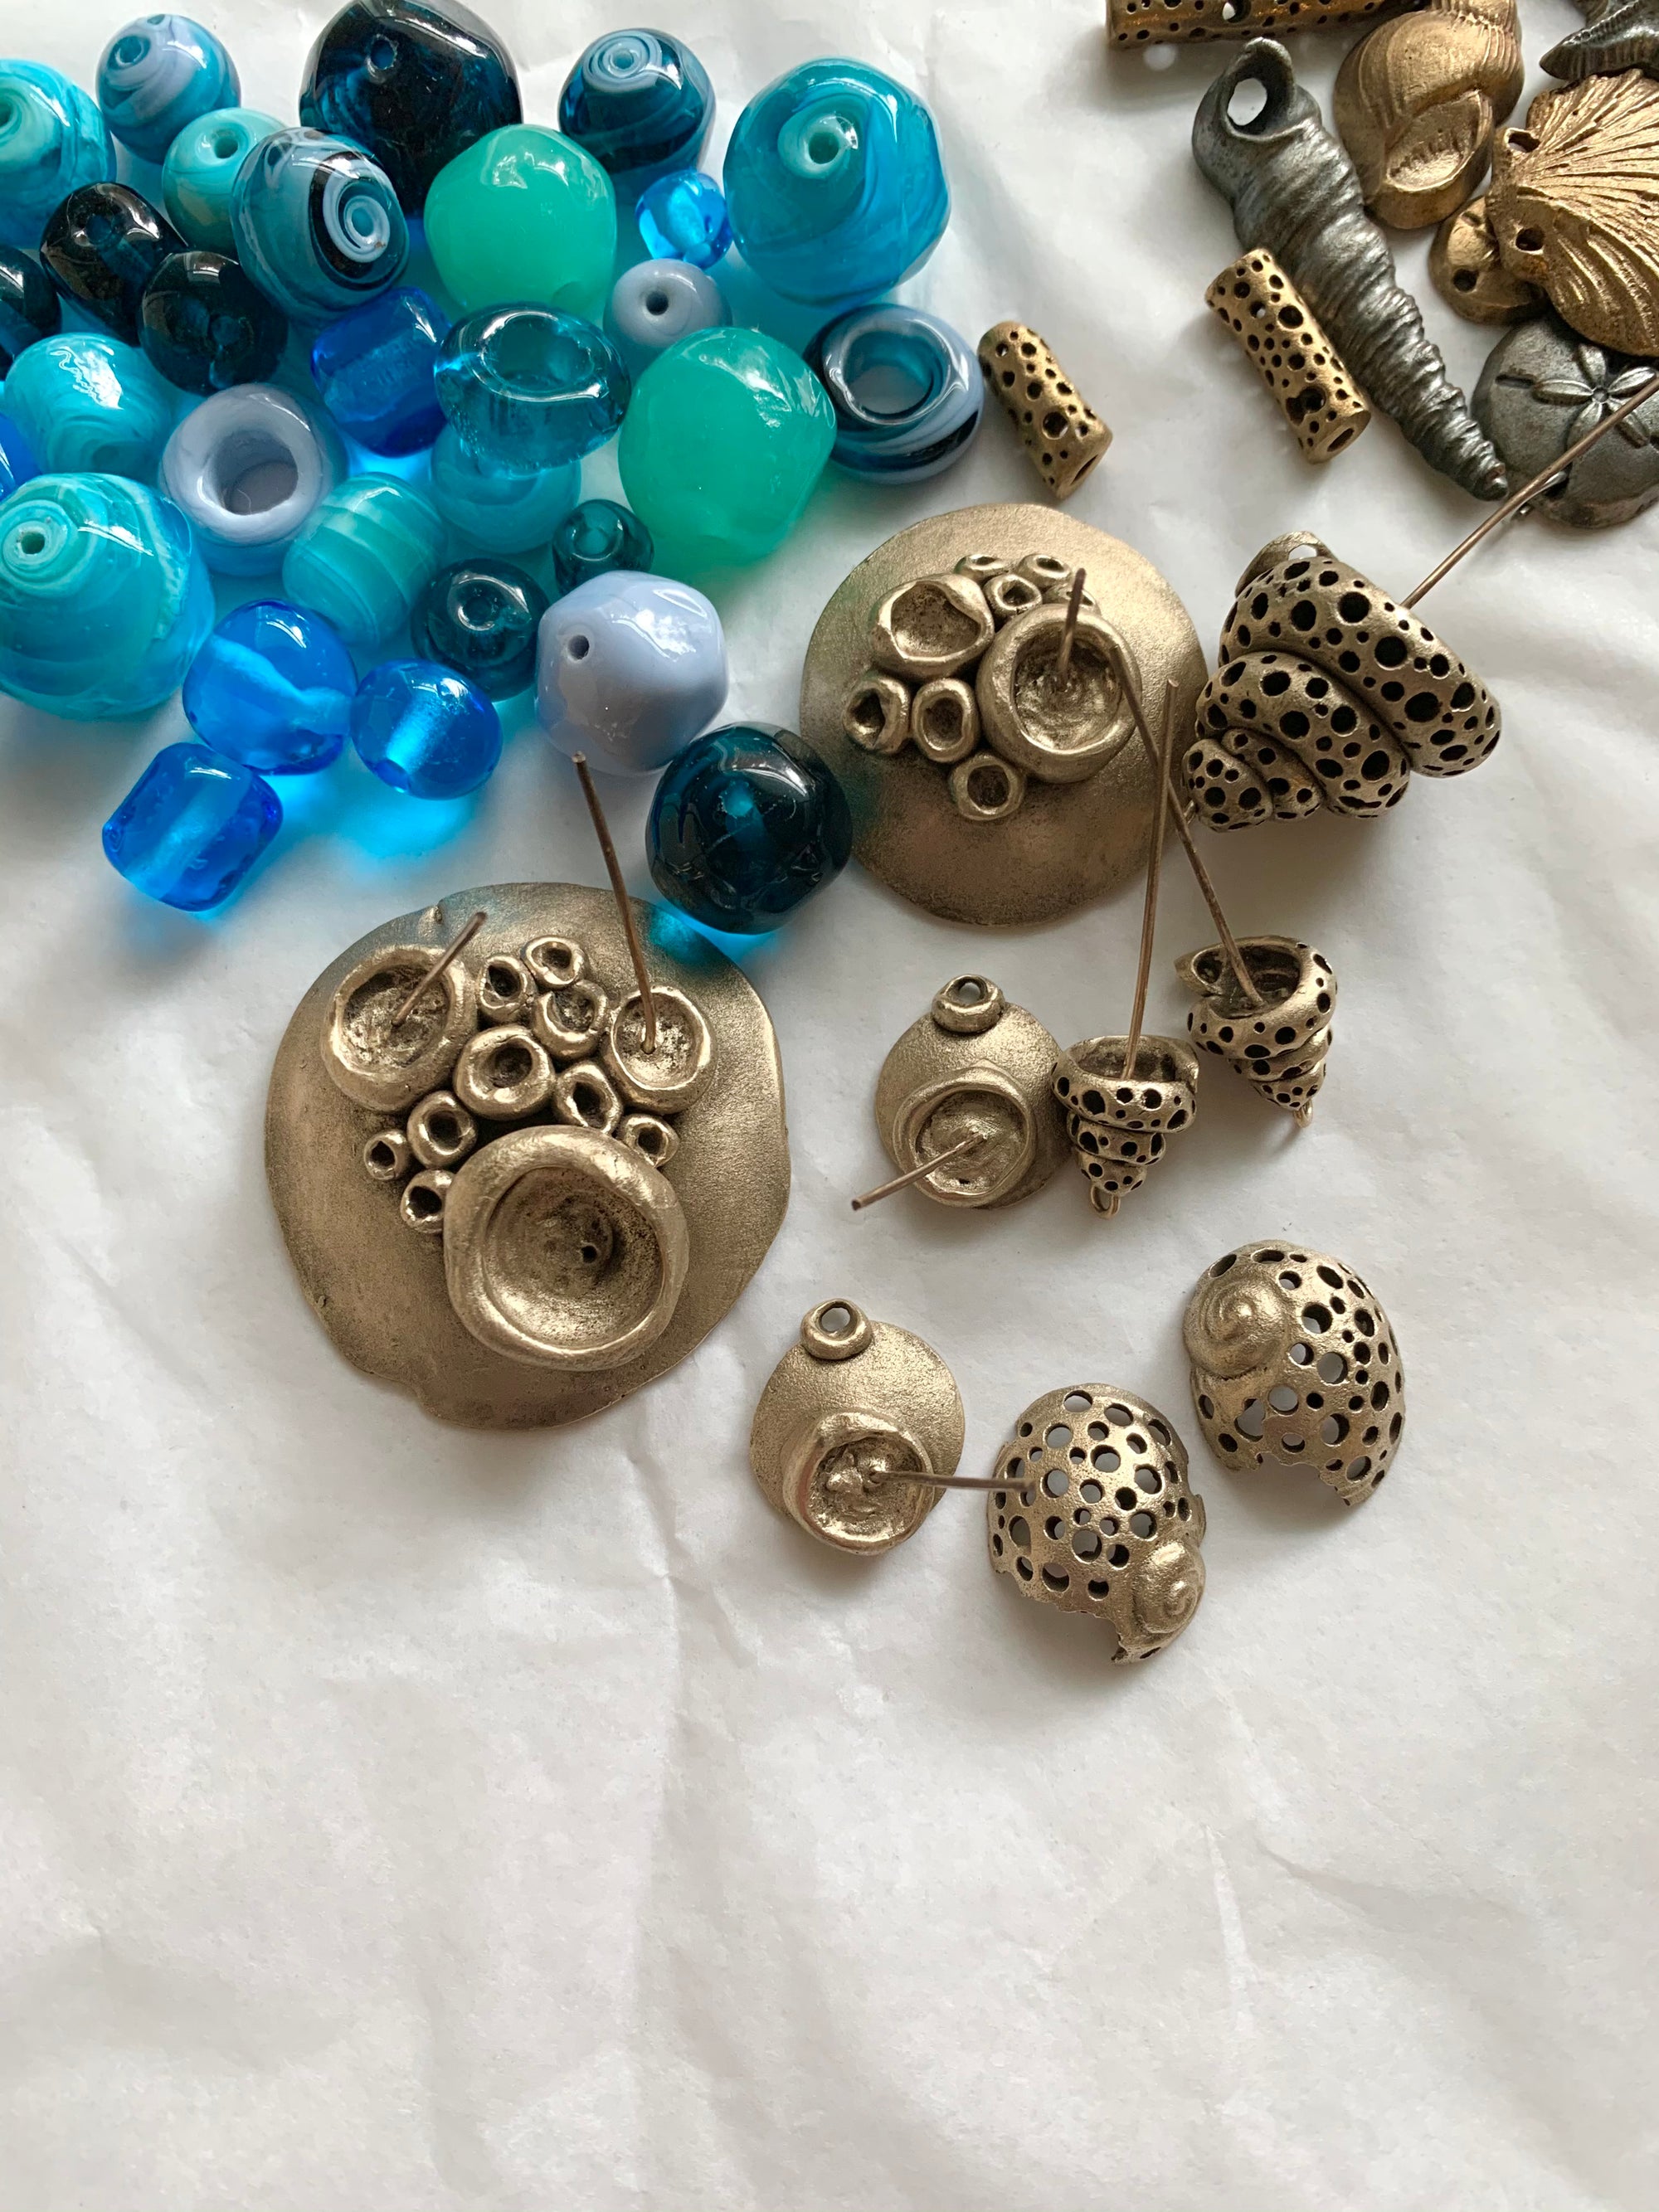 Ocean inspired bronze and blue jewelry pieces